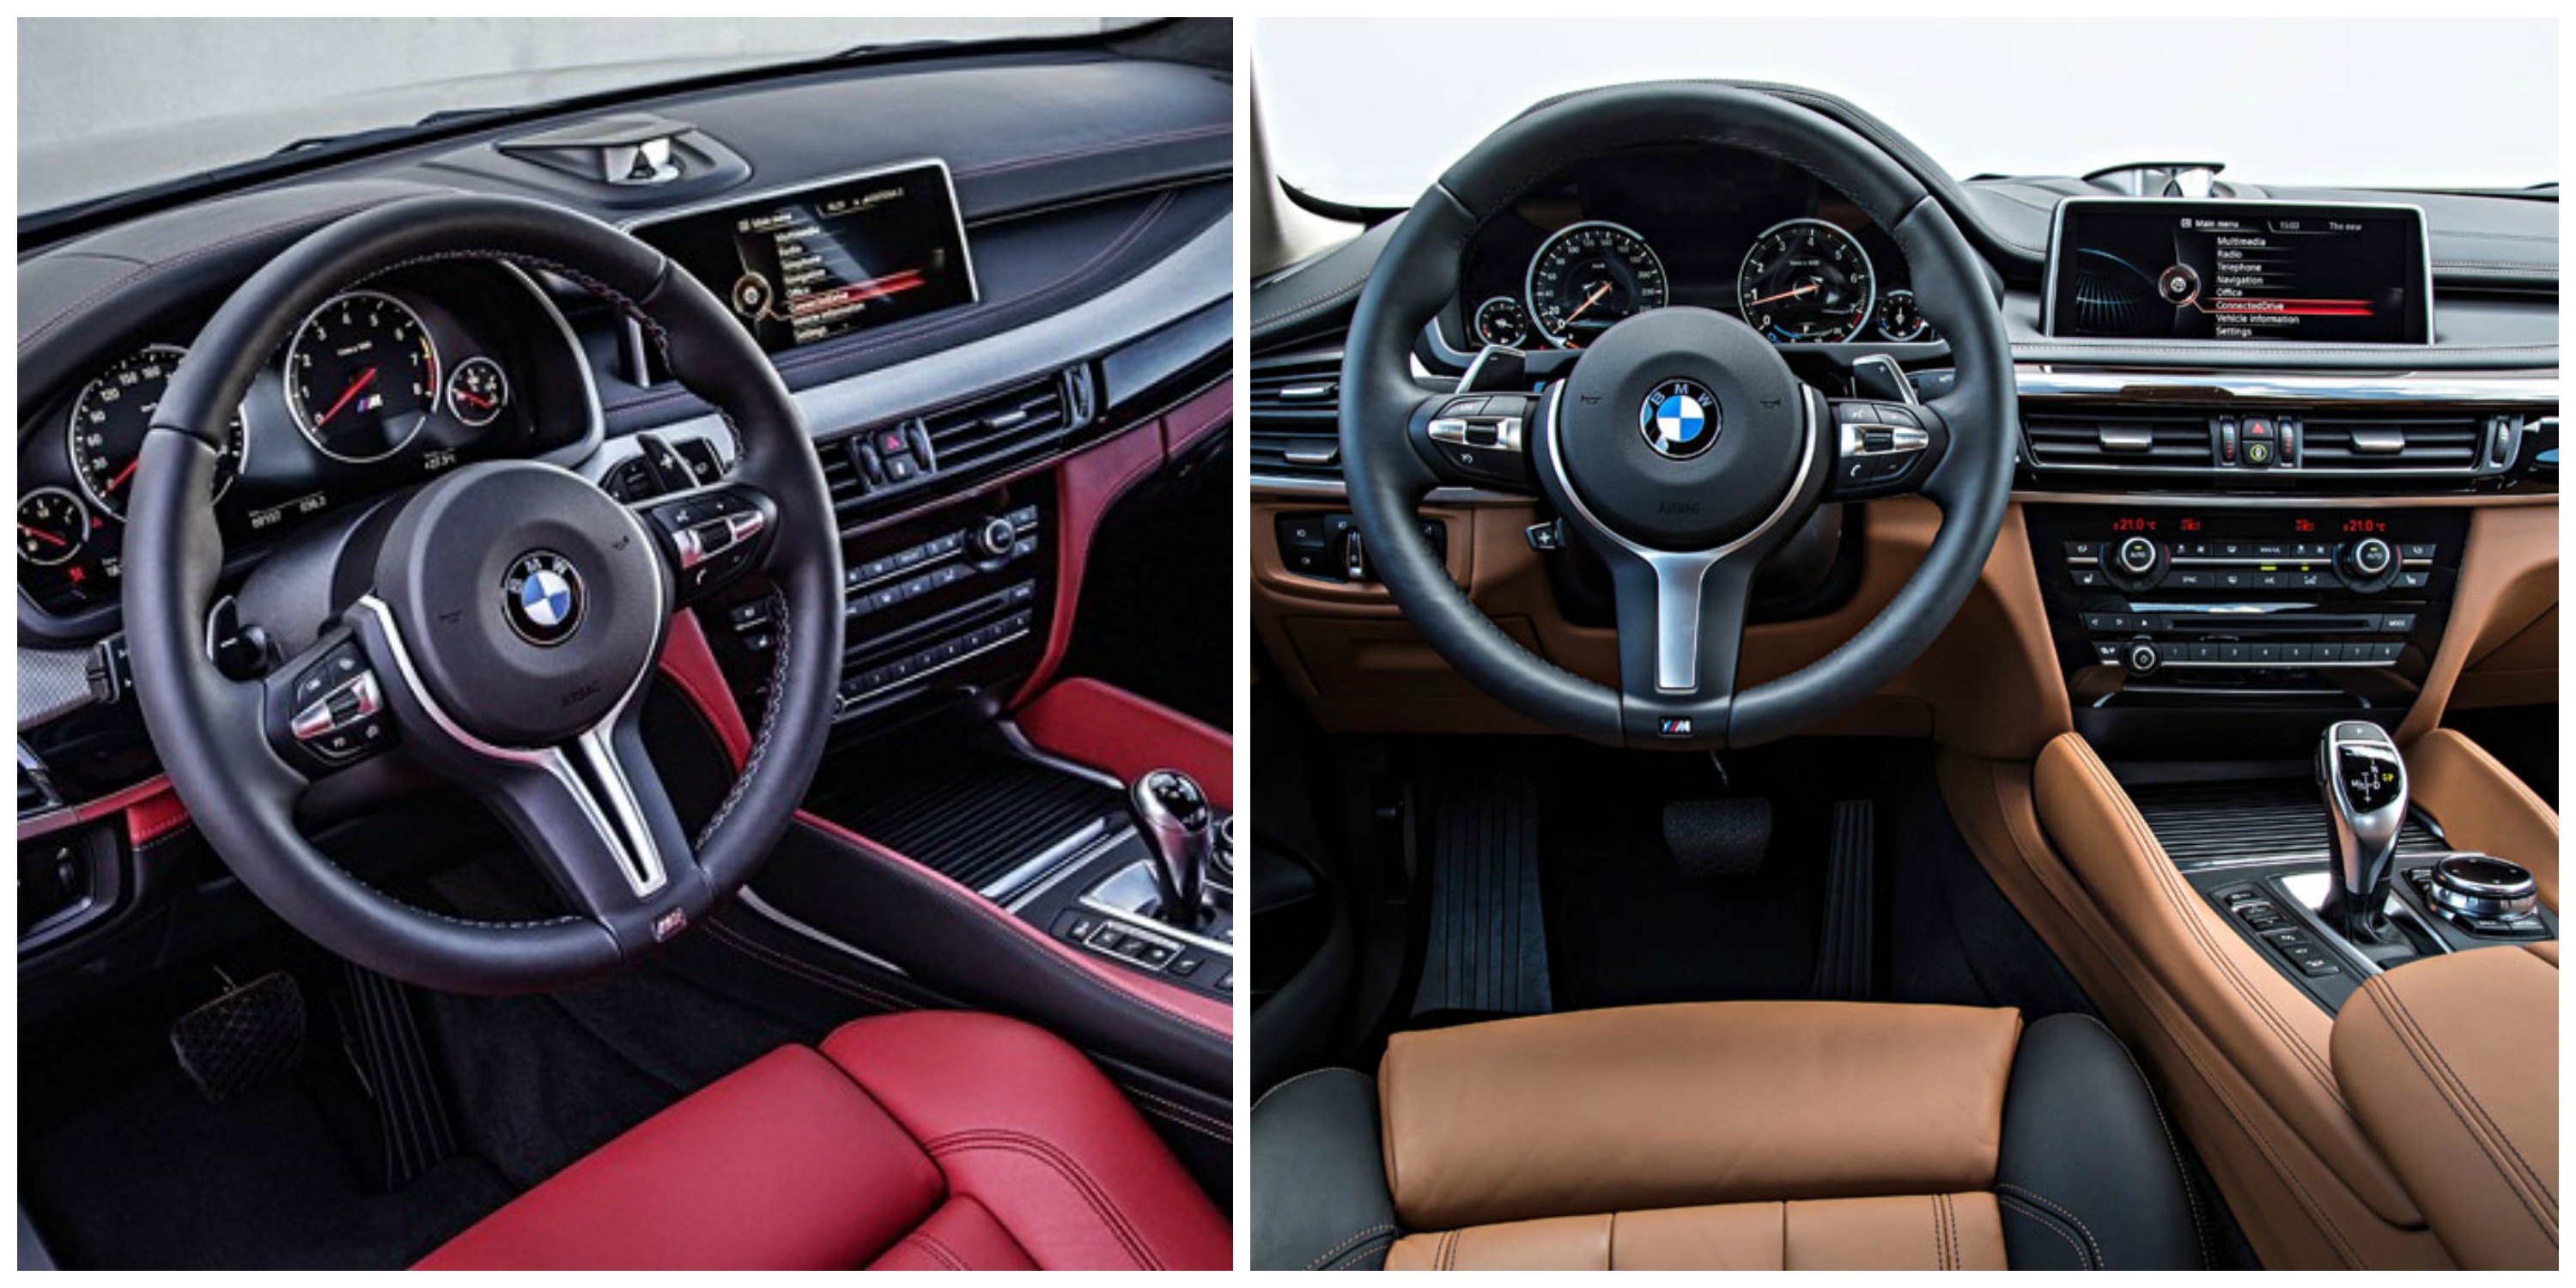 BMW X5 M (Left) and X6 M (right) interiors